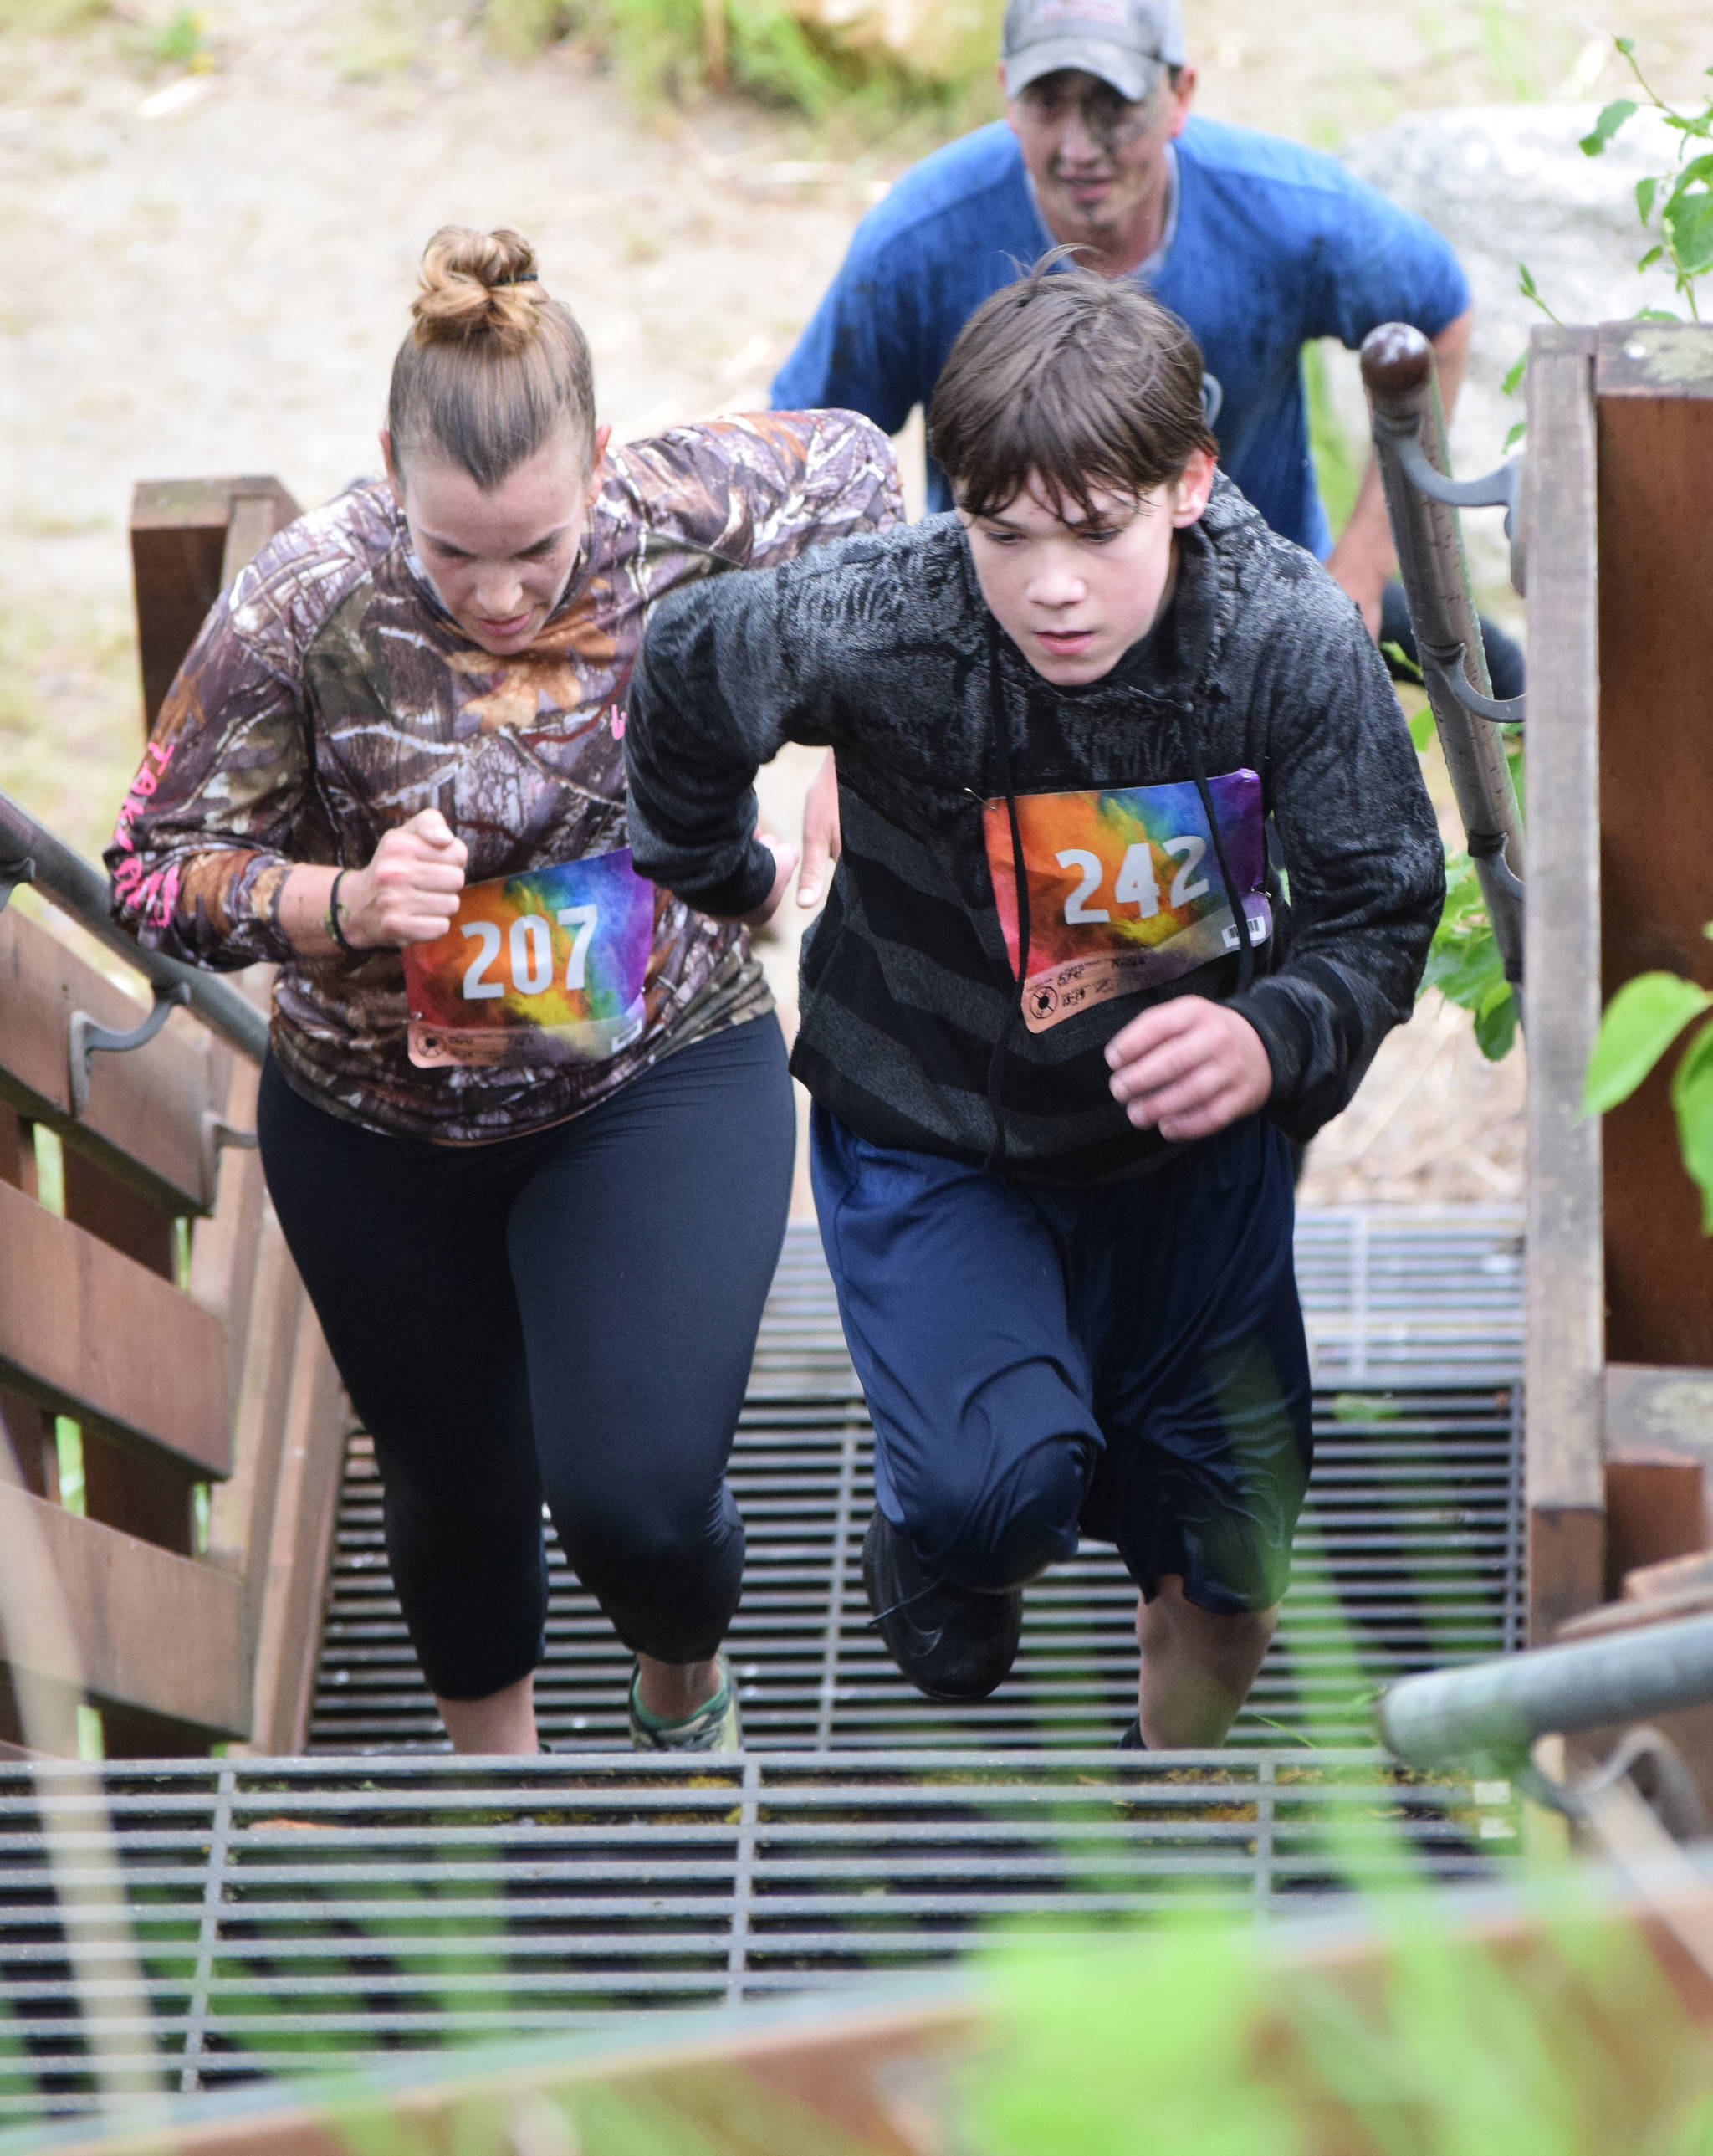 Rylee Fifer (right) leads Julie Mages up the final set of stairs Saturday at the Ninilchik Clam Scramble Mud and Obstacle Run in Ninilchik. (Photo by Joey Klecka/Peninsula Clarion)